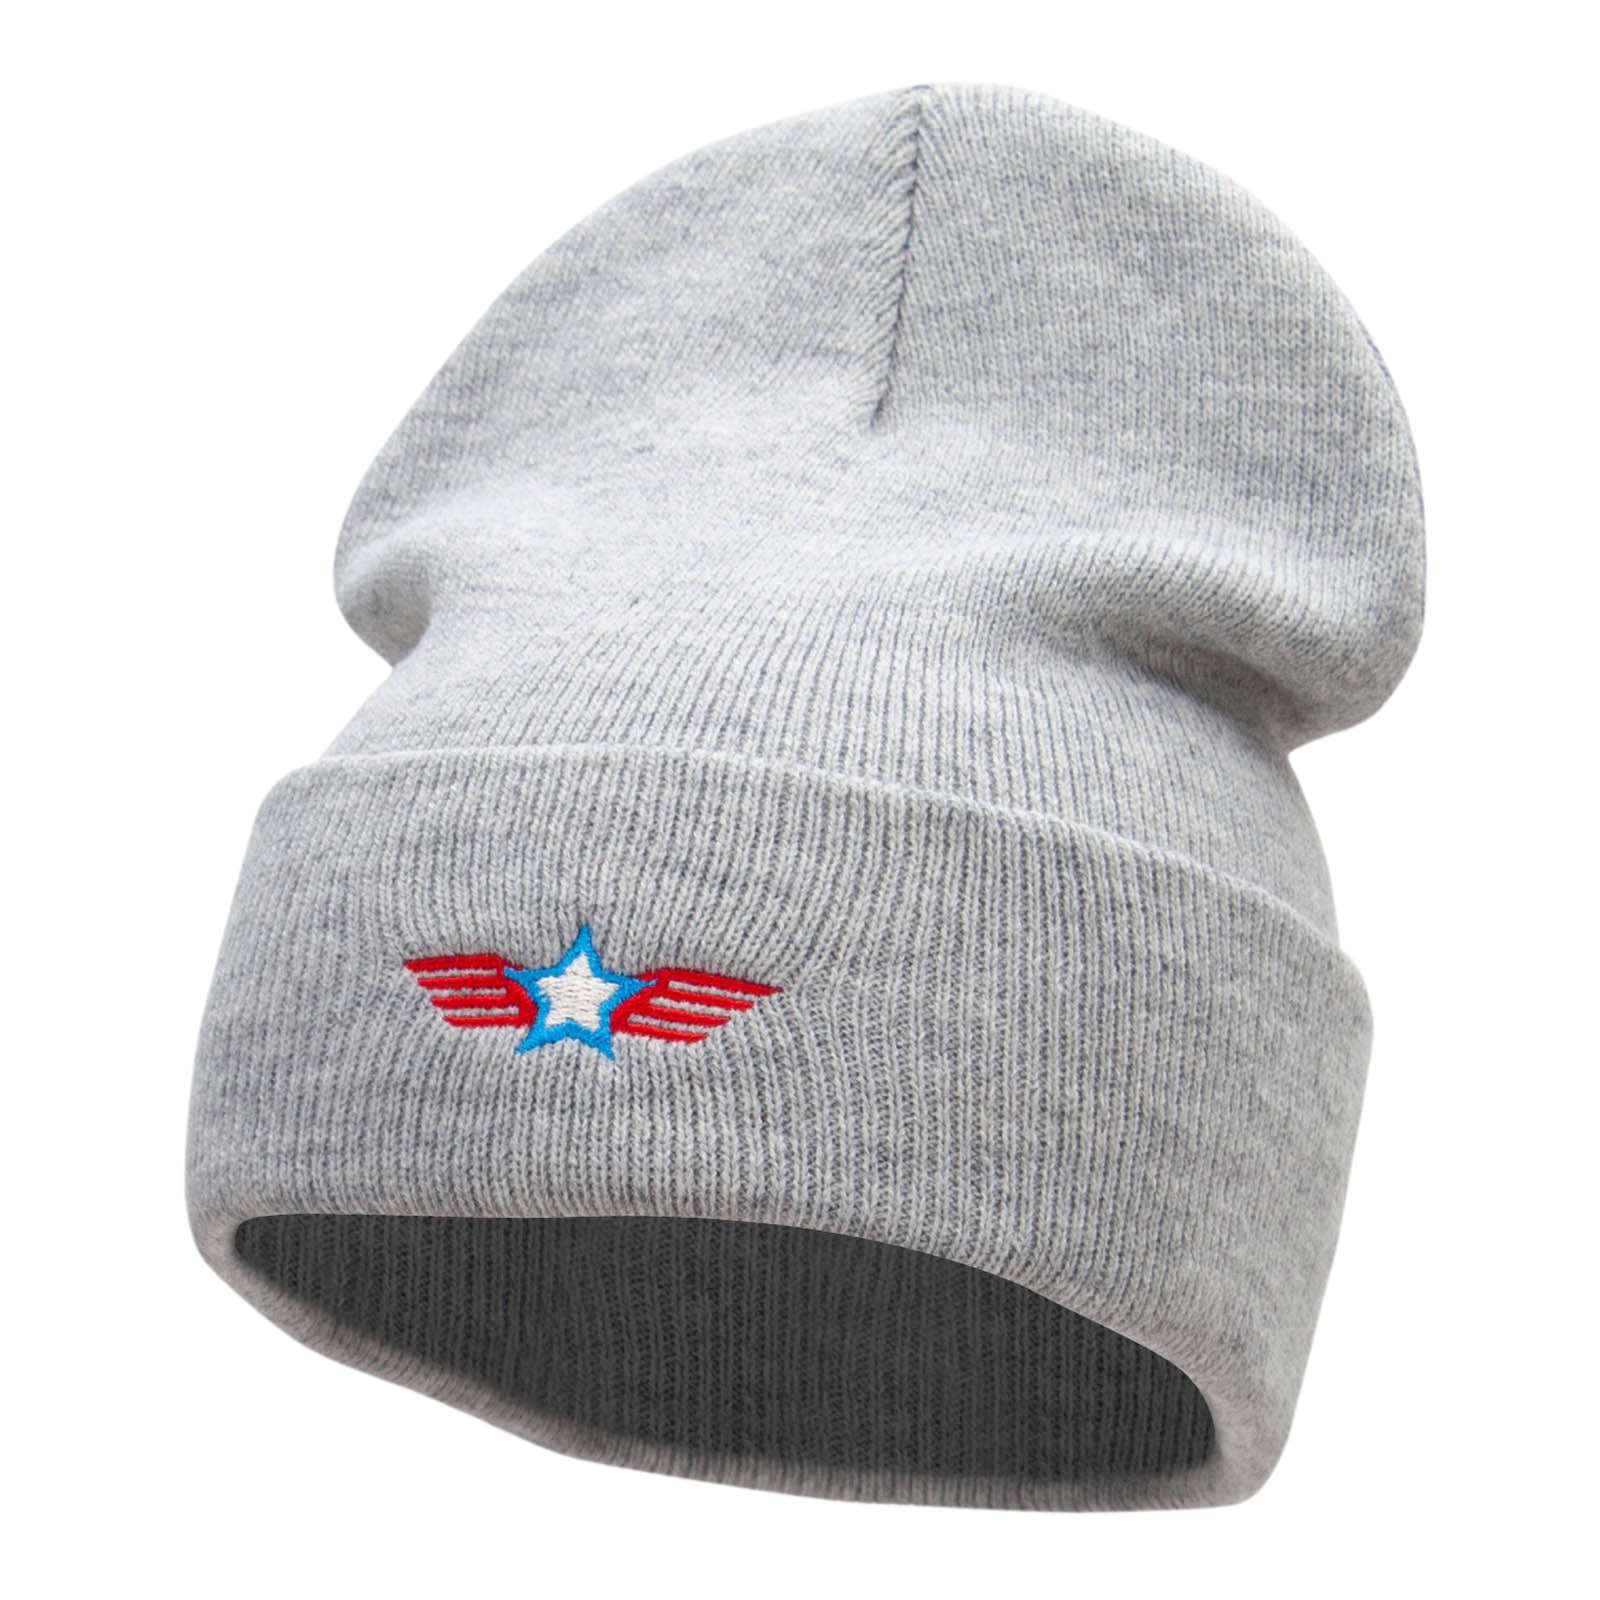 Winged Star Embroidered 12 Inch Long Knitted Beanie - Heather Grey OSFM